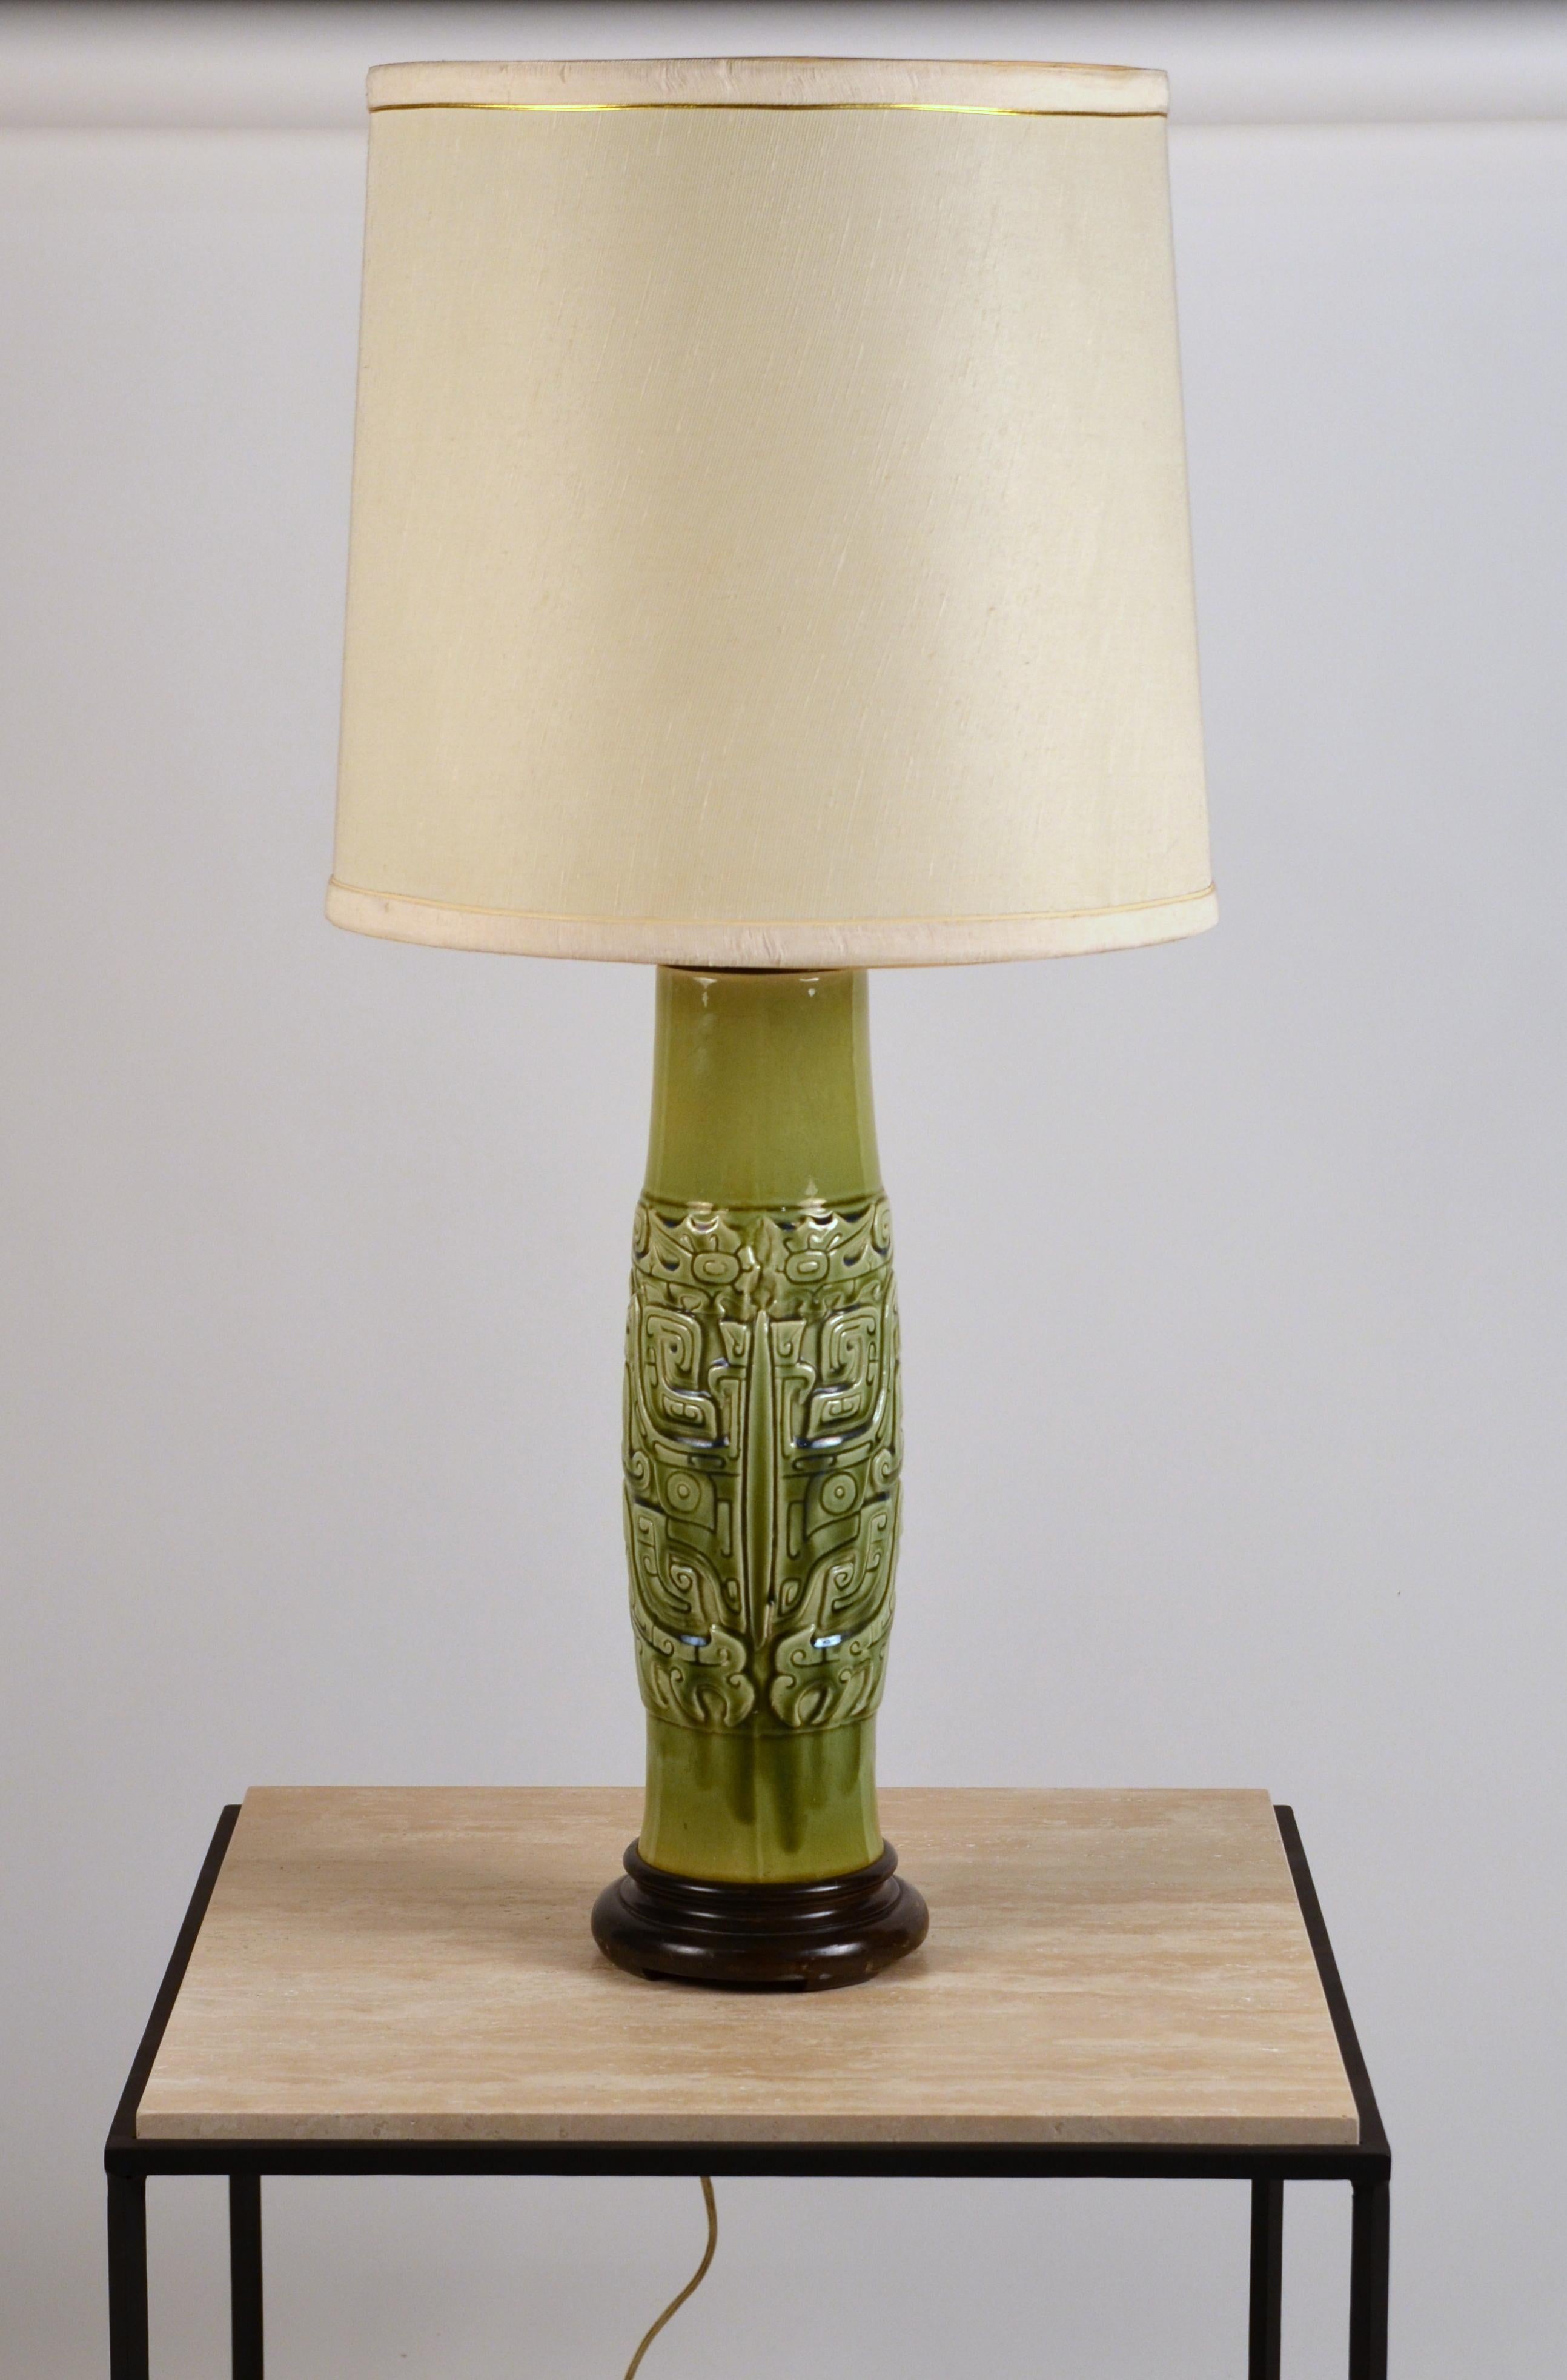 Elegant Mayan Inspired Ceramic Lamp with Original Shade In Good Condition For Sale In Los Angeles, CA